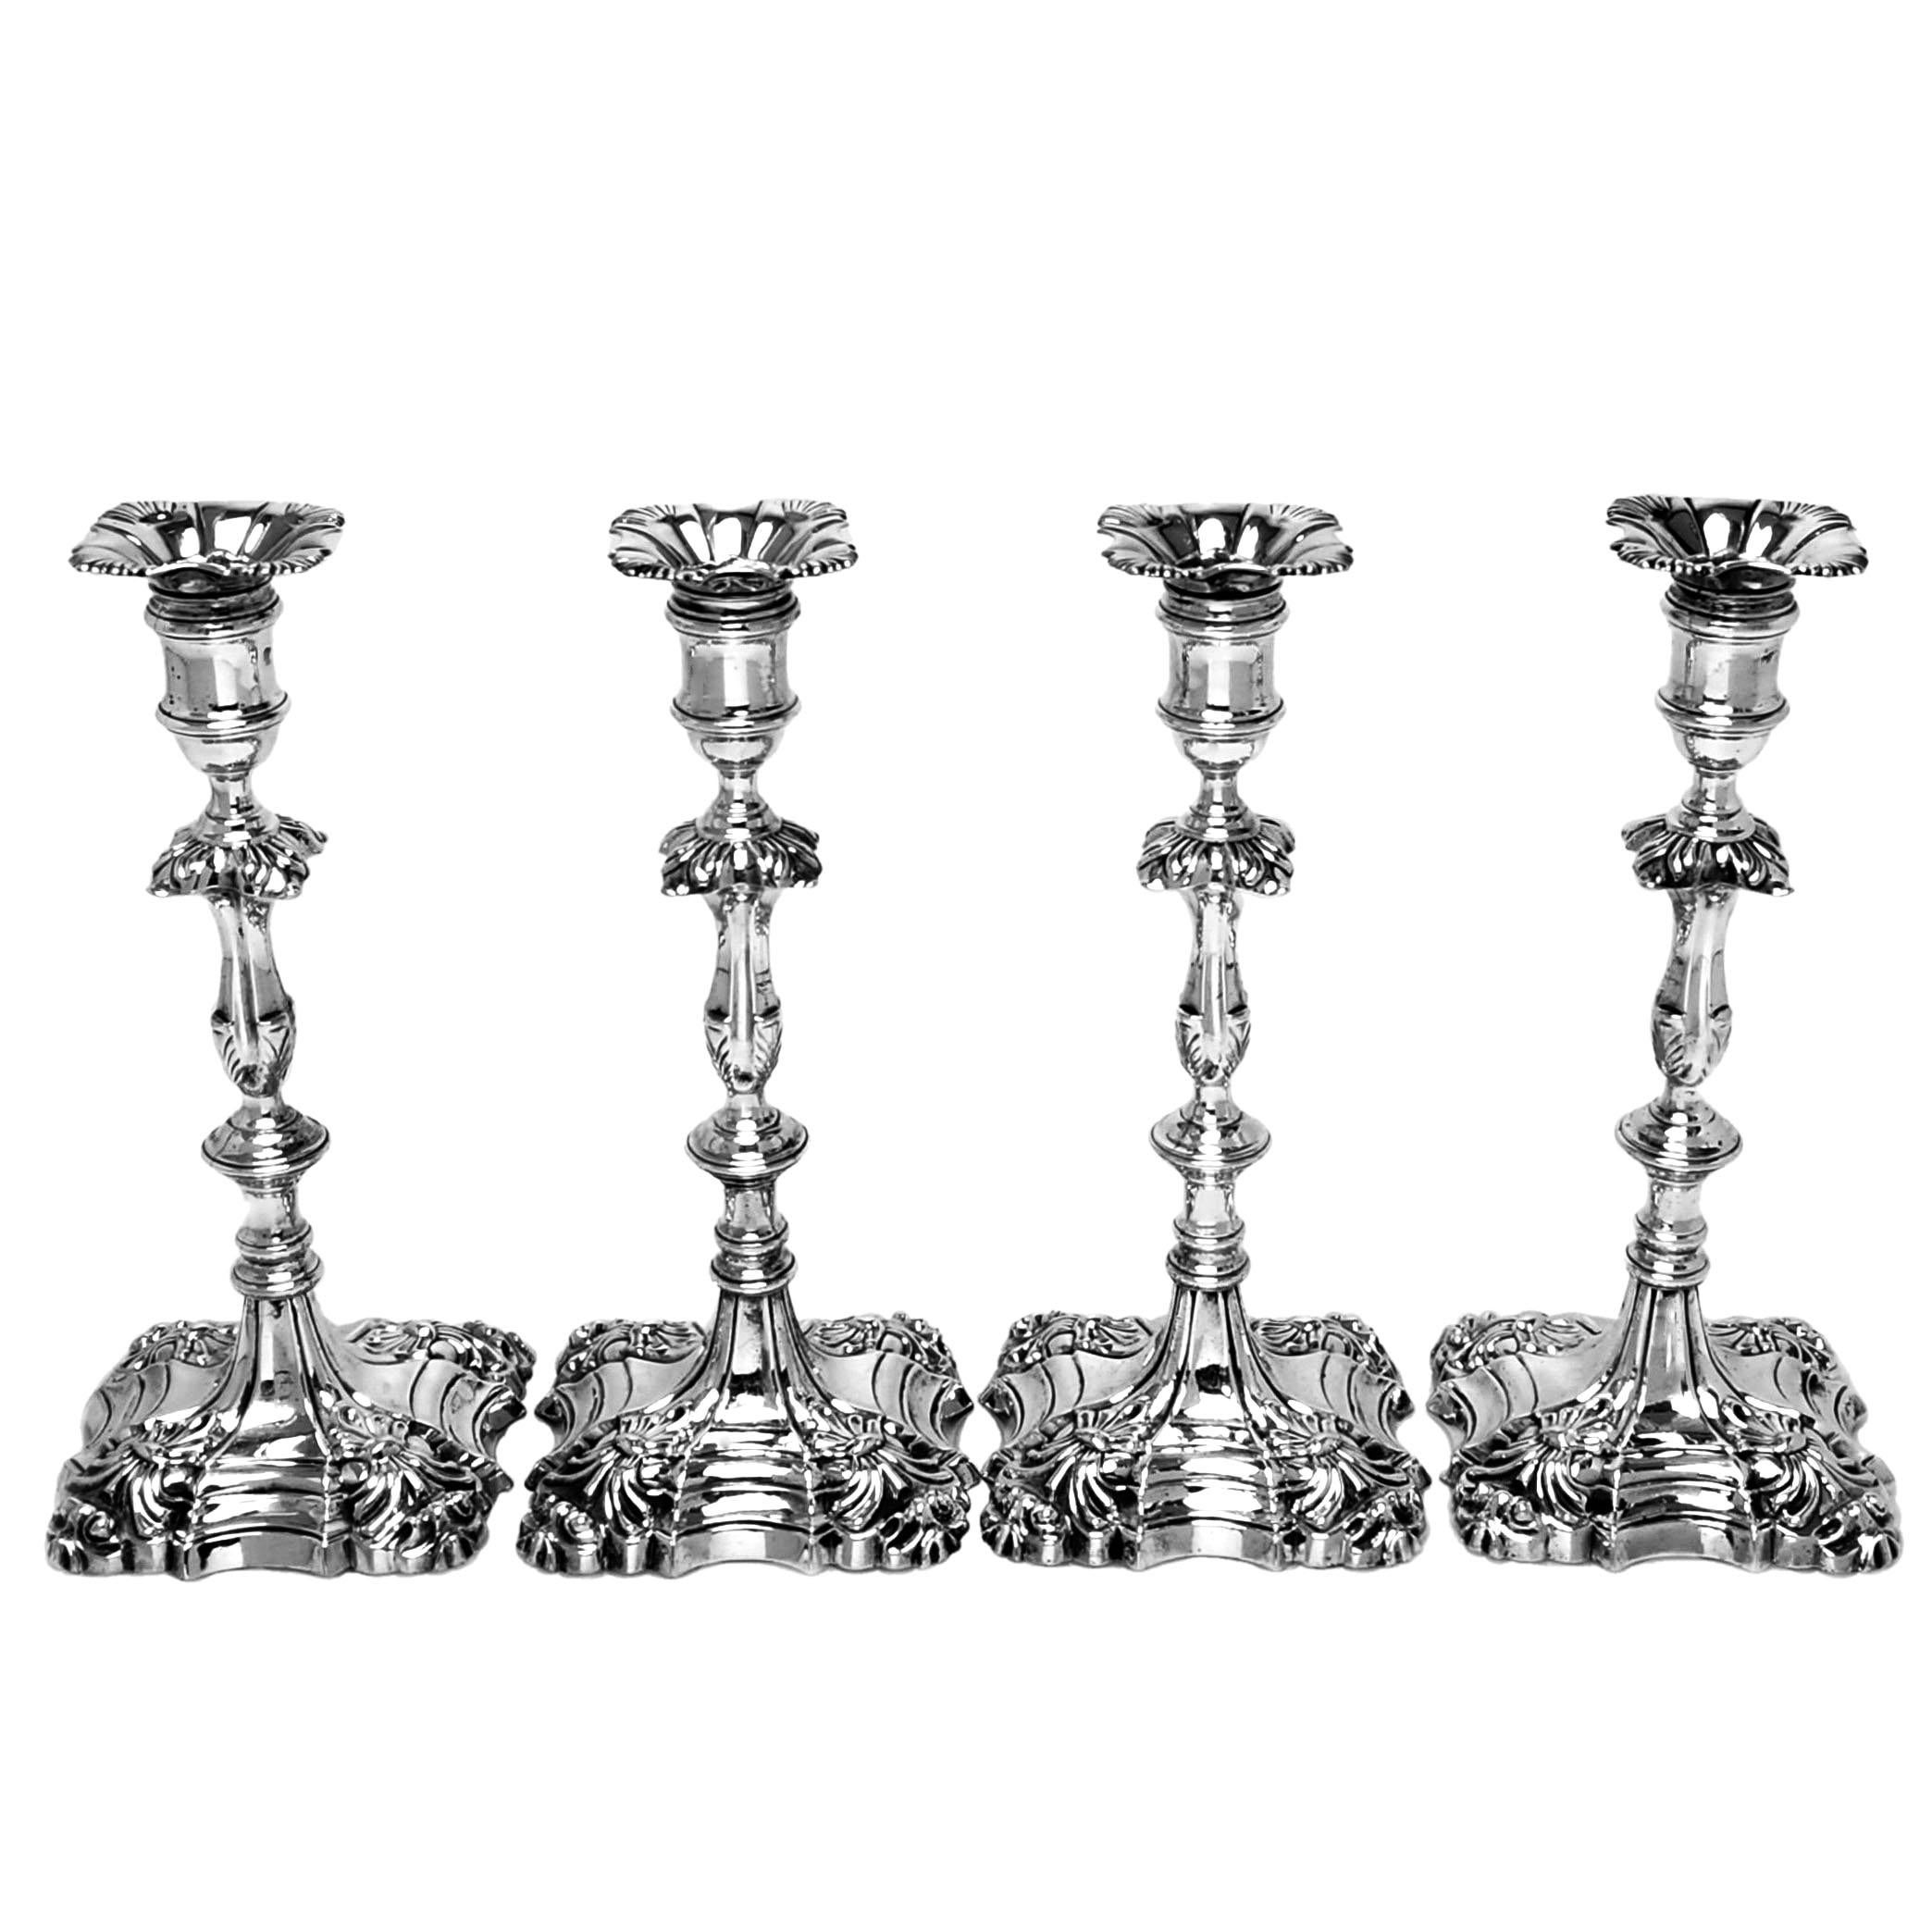 A set of 4 Antique George II Cast Silver candlesticks with elegant quatrefoil shaped square bases and knopped columns. The Candlesticks have removable sconces.

Made in London, England in 1759 in William Grundy.

Approx. Weight - 2350g /